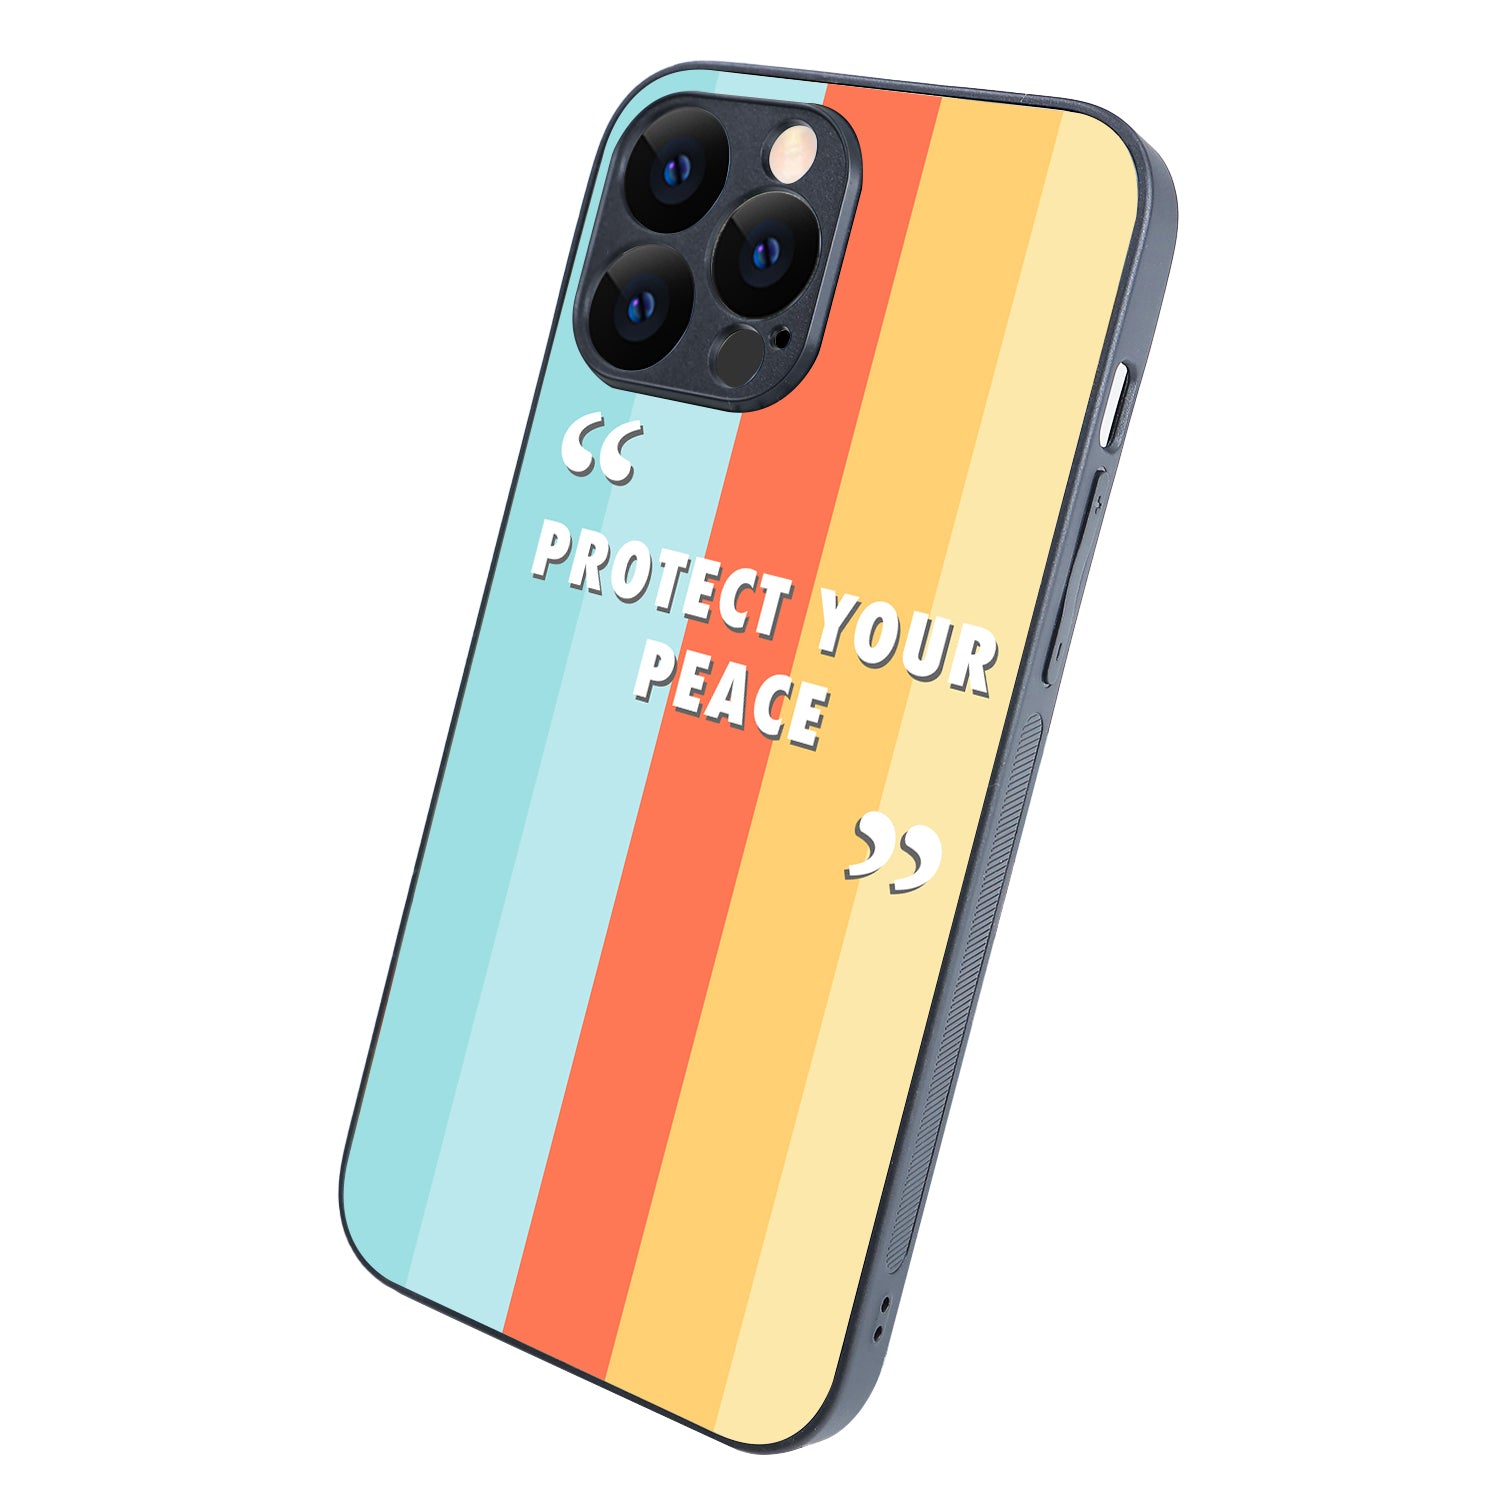 Protect your peace Motivational Quotes iPhone 13 Pro Max Case